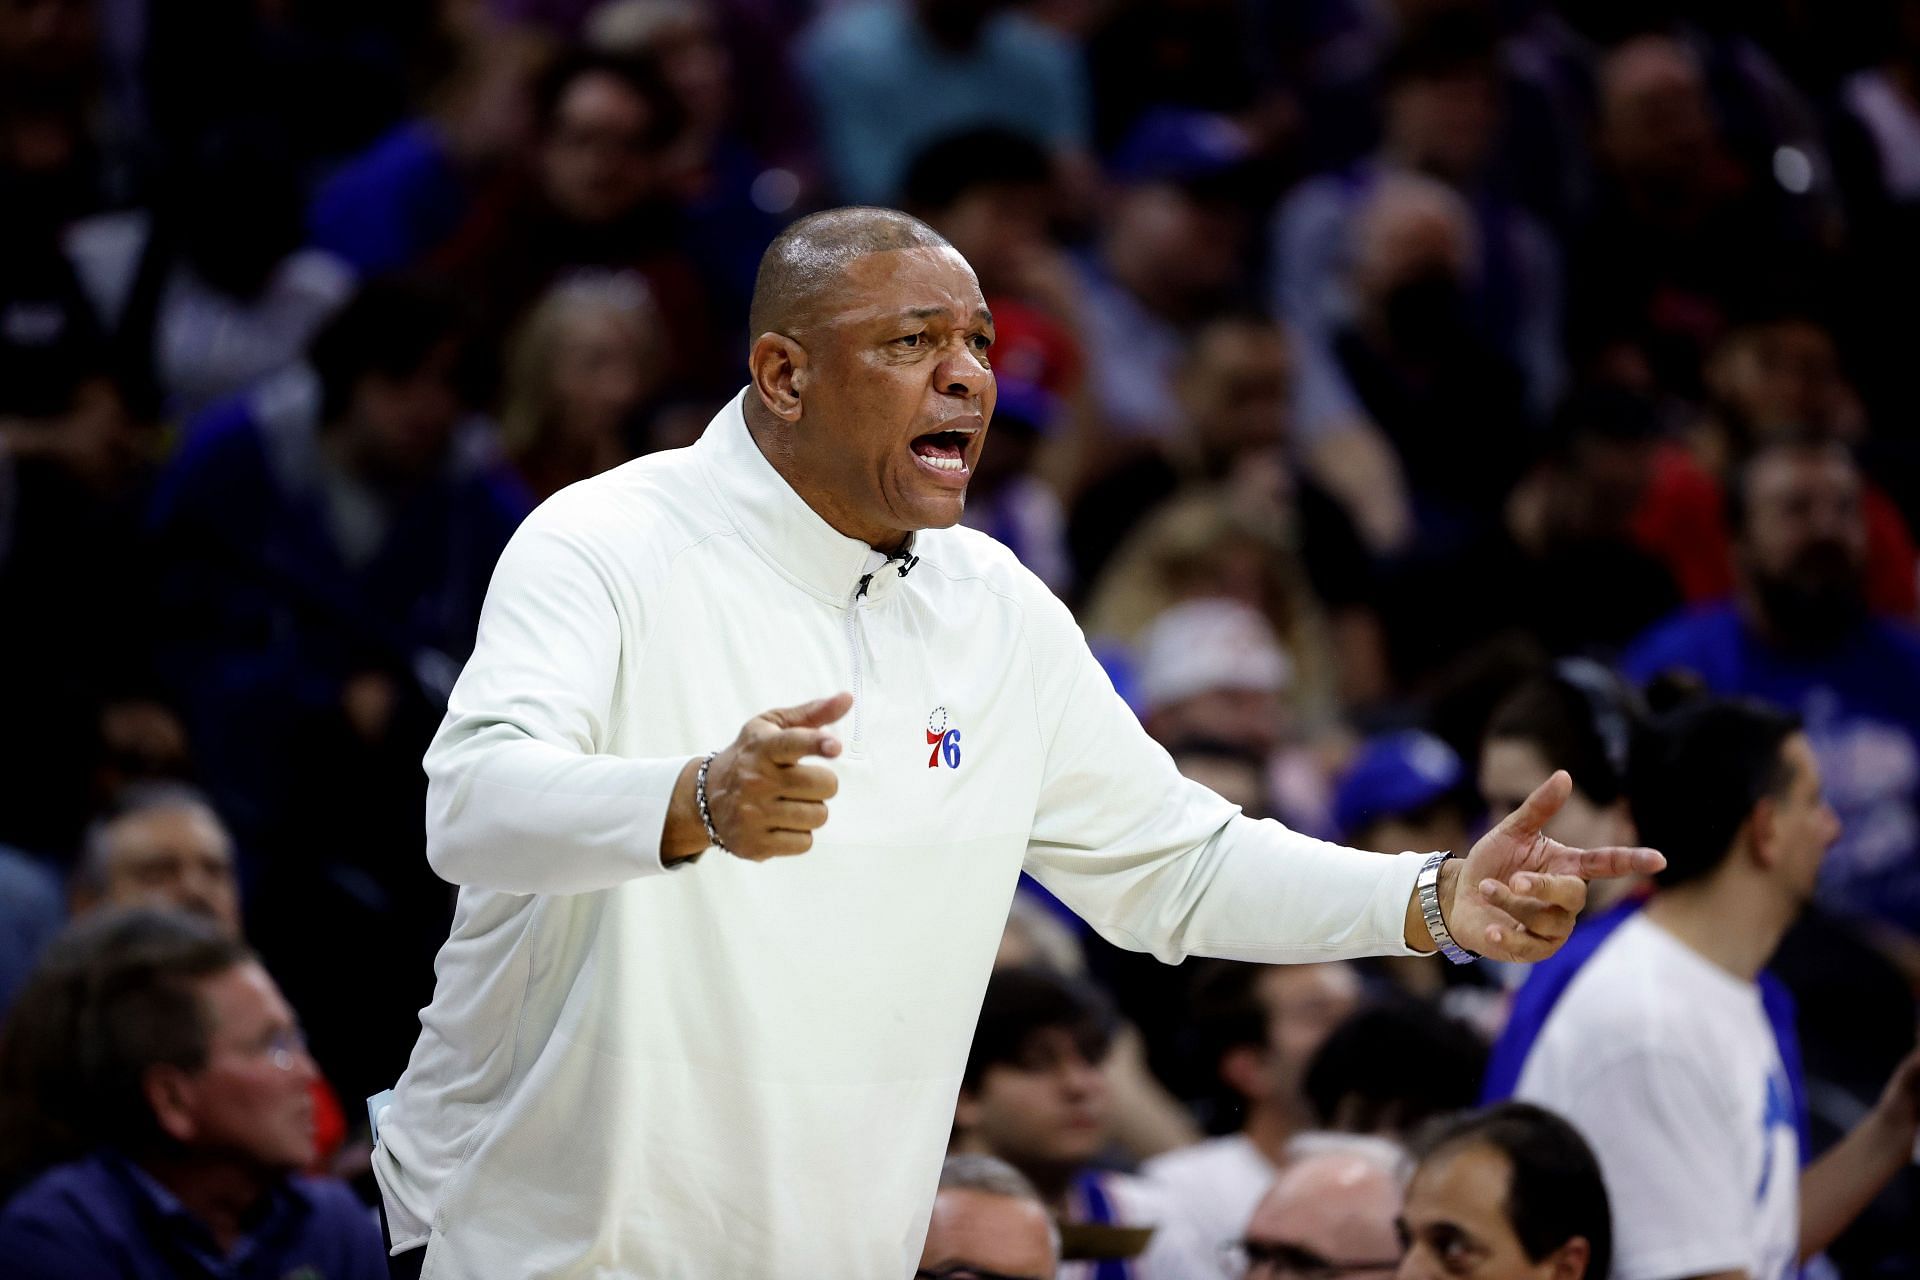 Despite a disappointing finish with Philadelphia, signs point to Doc Rivers staying put for now.